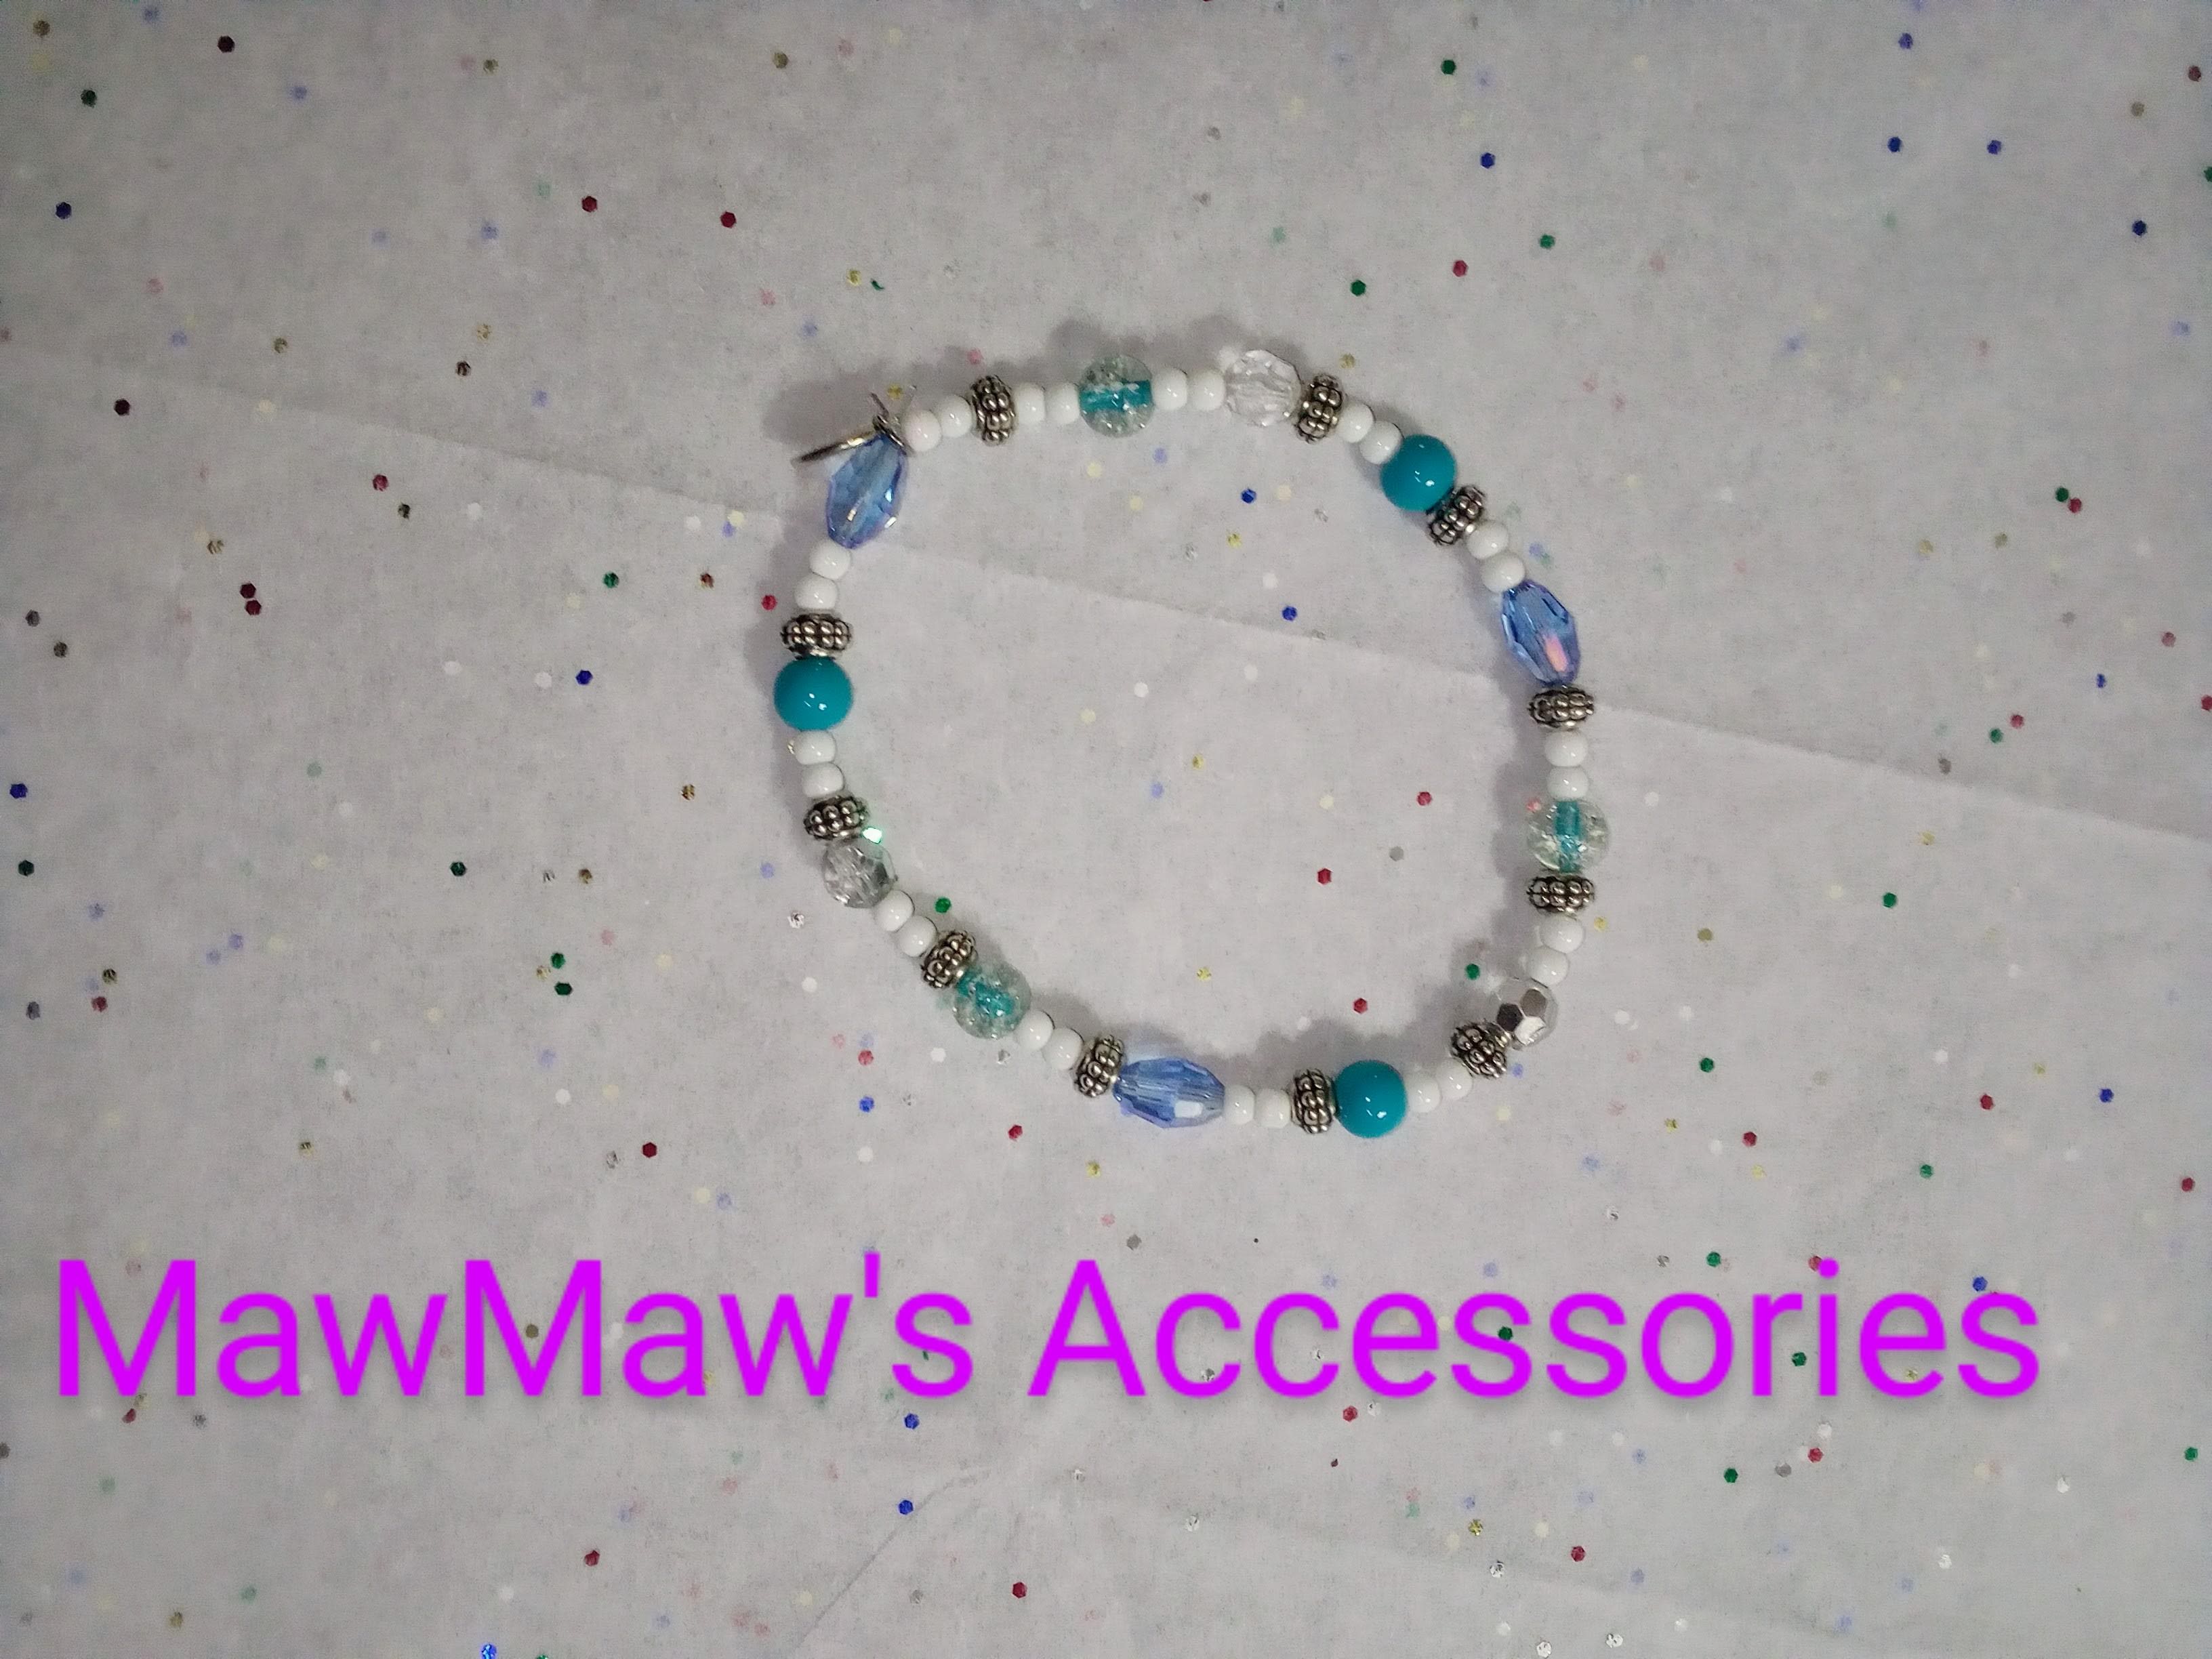 Mawmaws Accessories